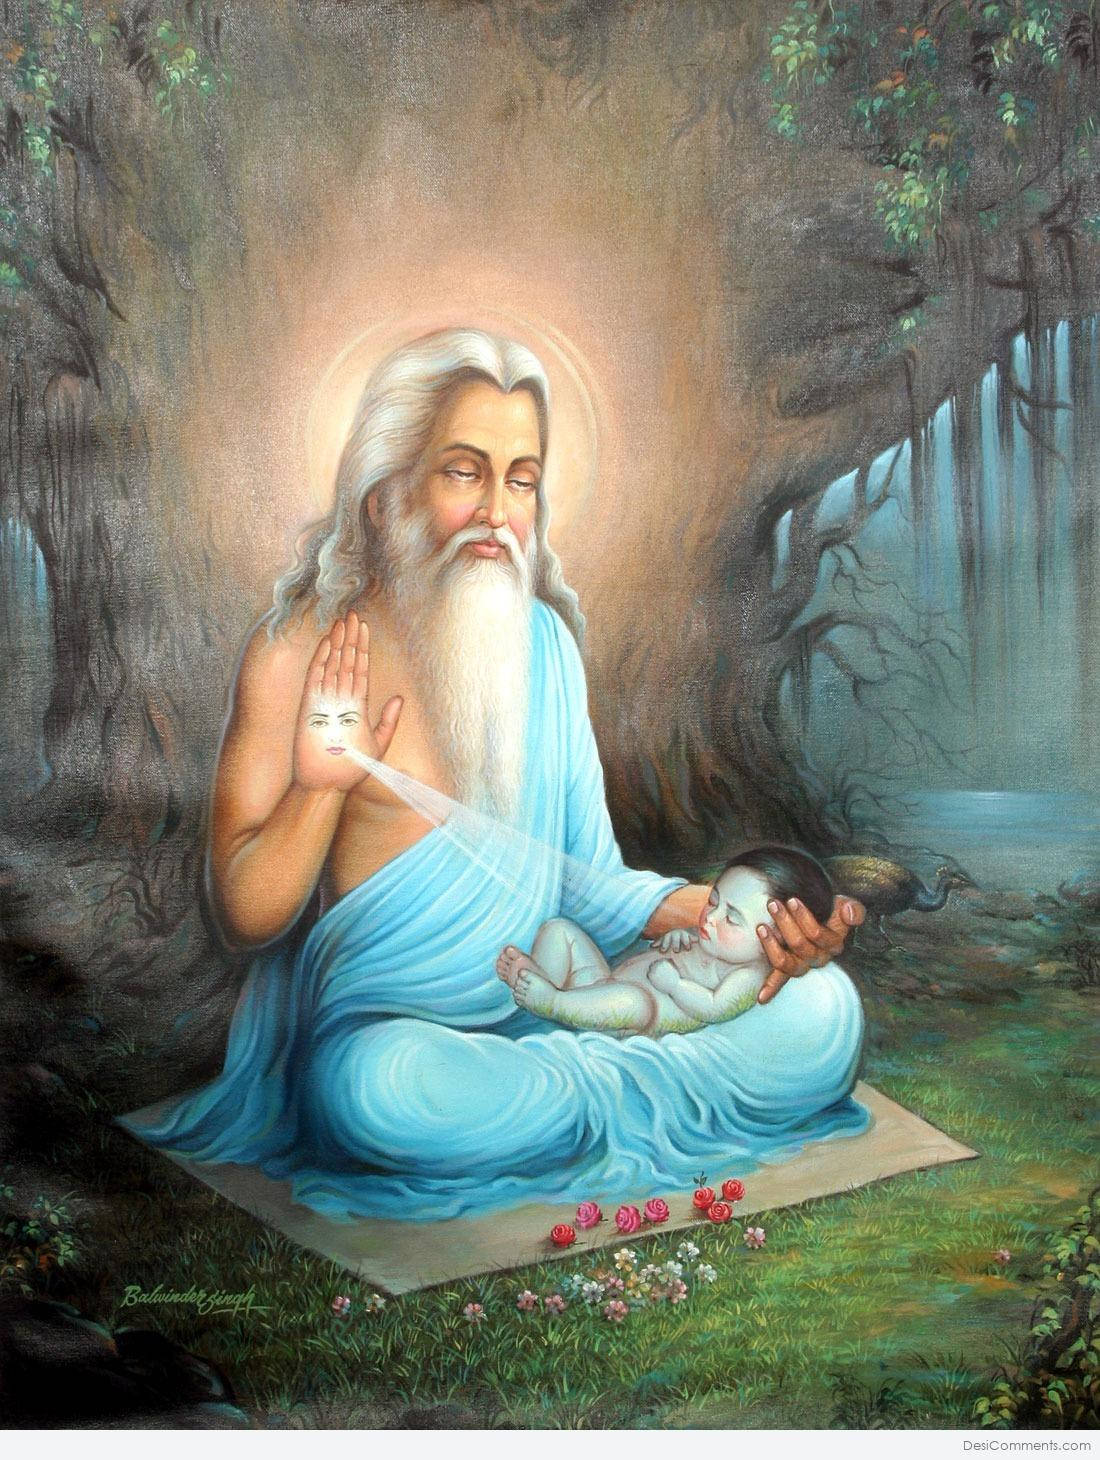 Download Valmiki With A Baby Under A Tree Wallpaper | Wallpapers.com